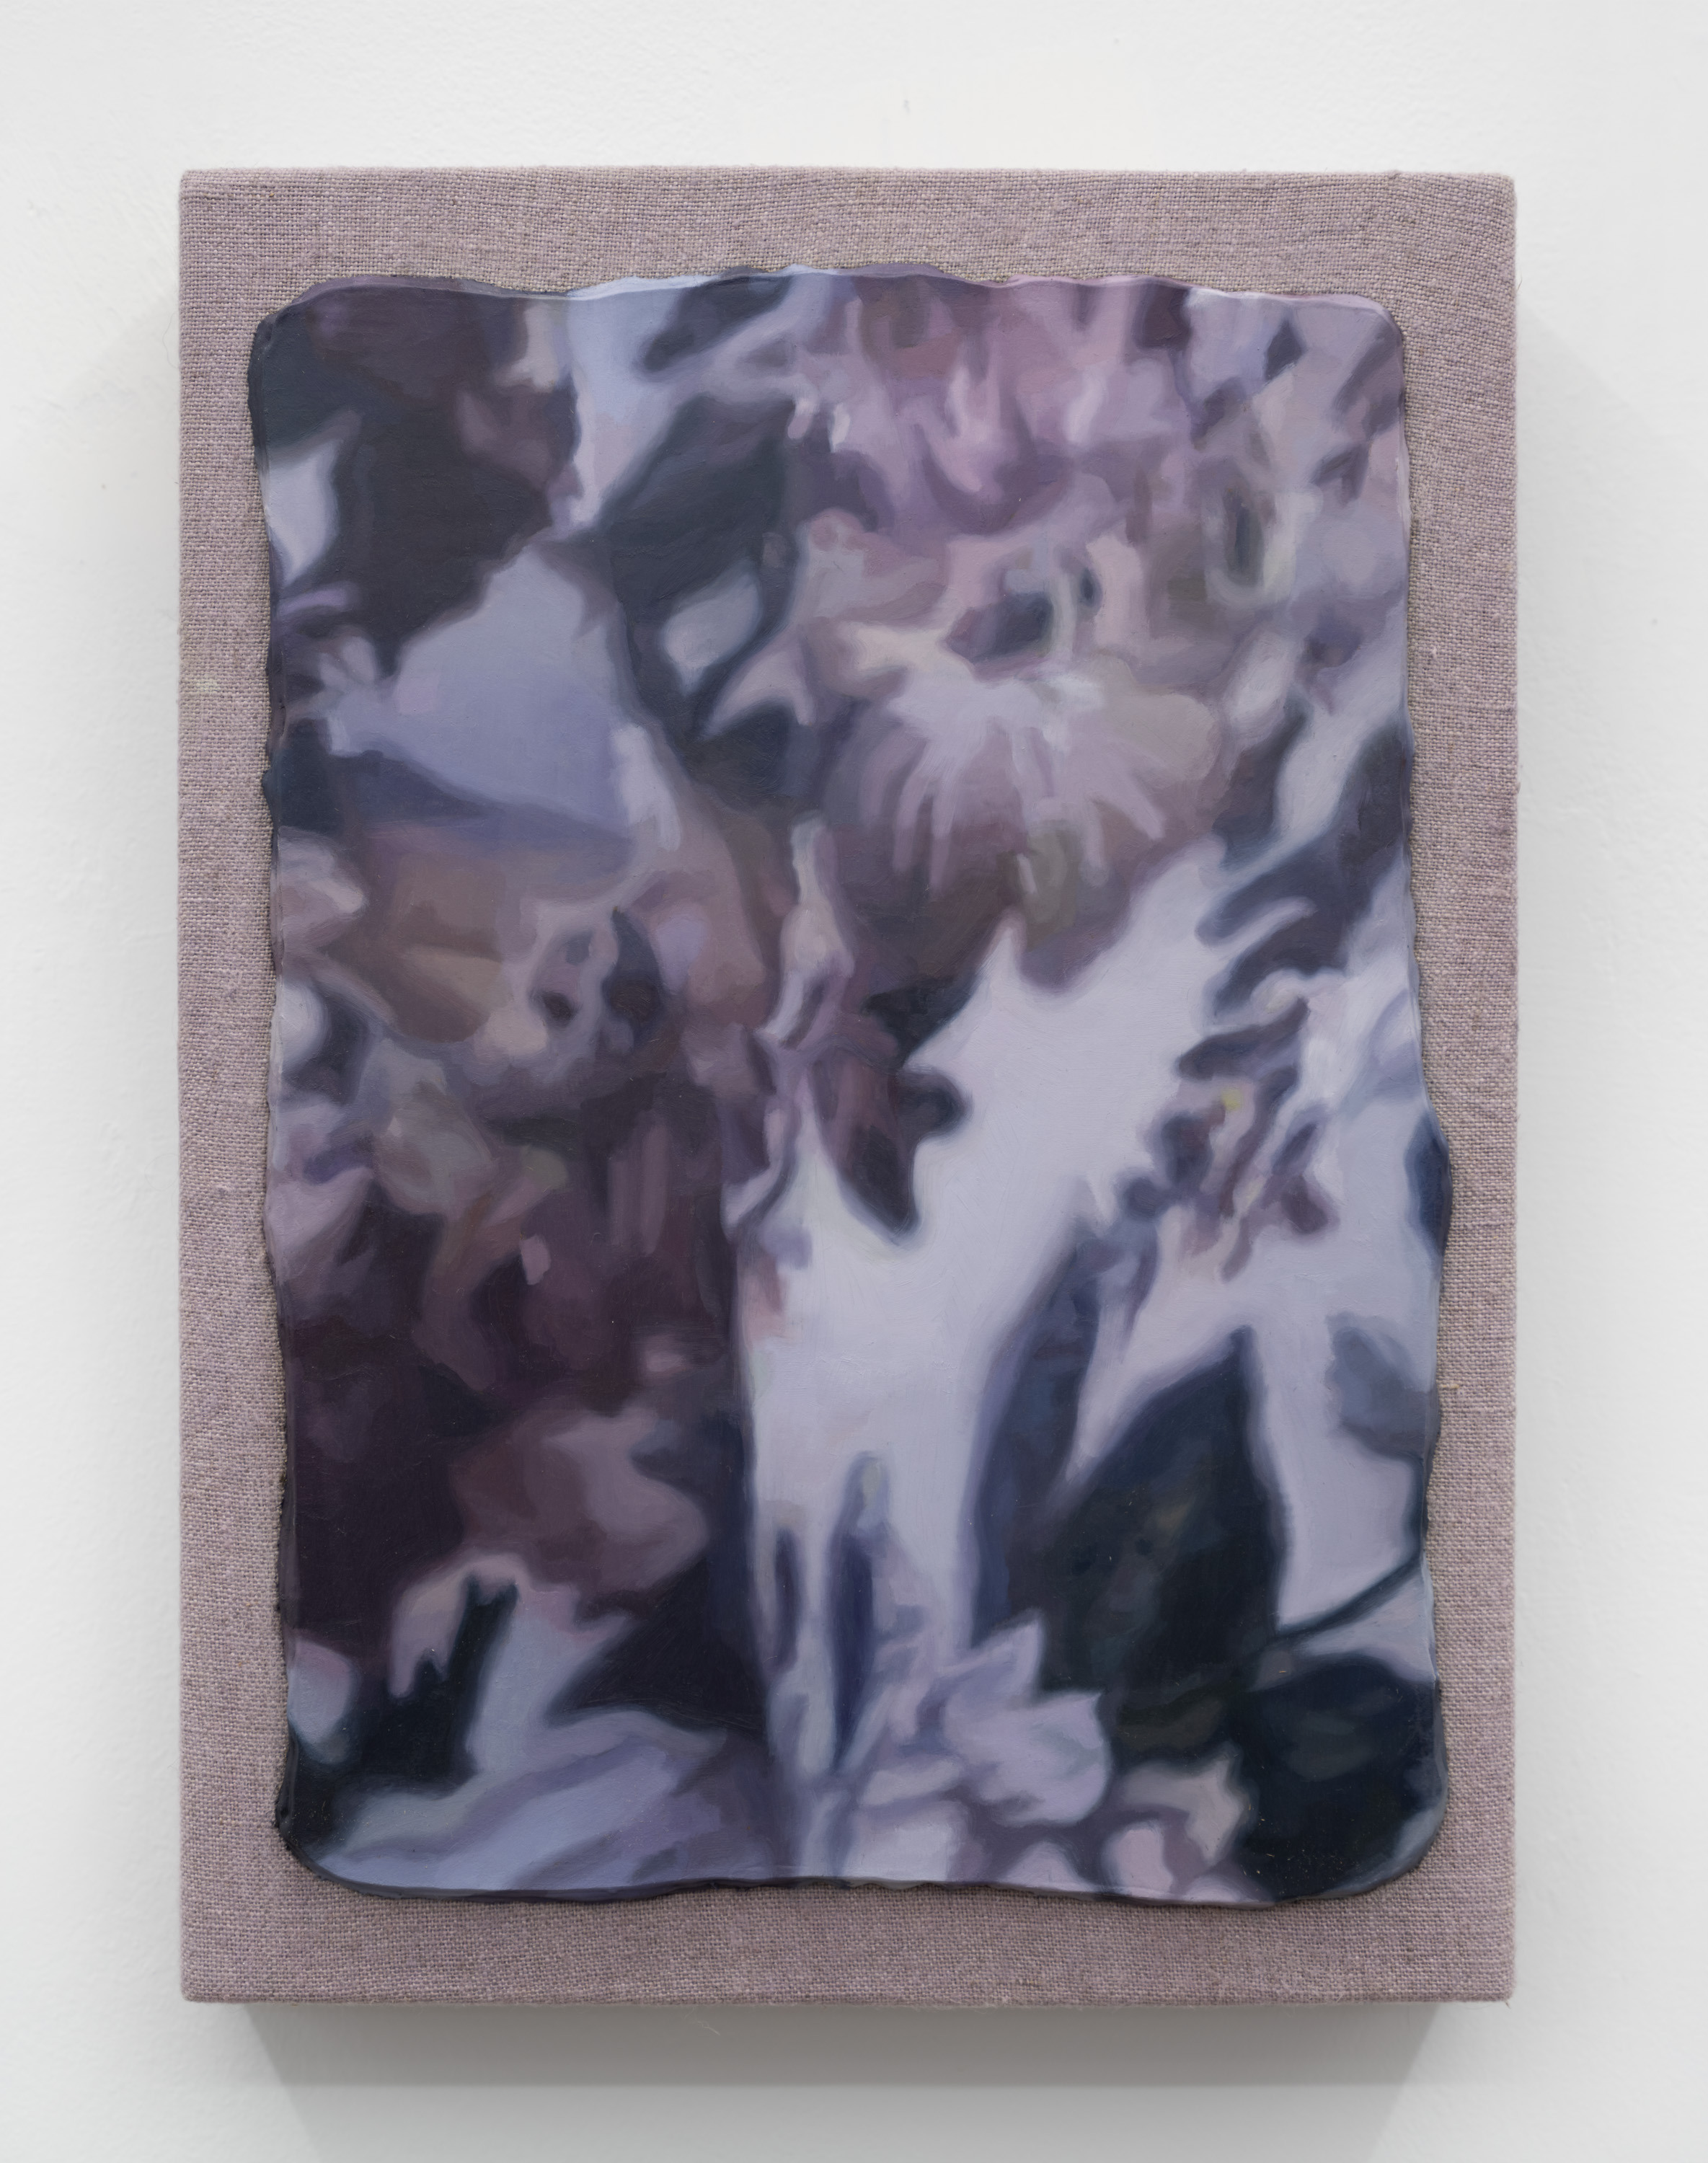 Metope: Floral pattern, 2023 Oil on linen stretched panel 12.25 x 9 inches